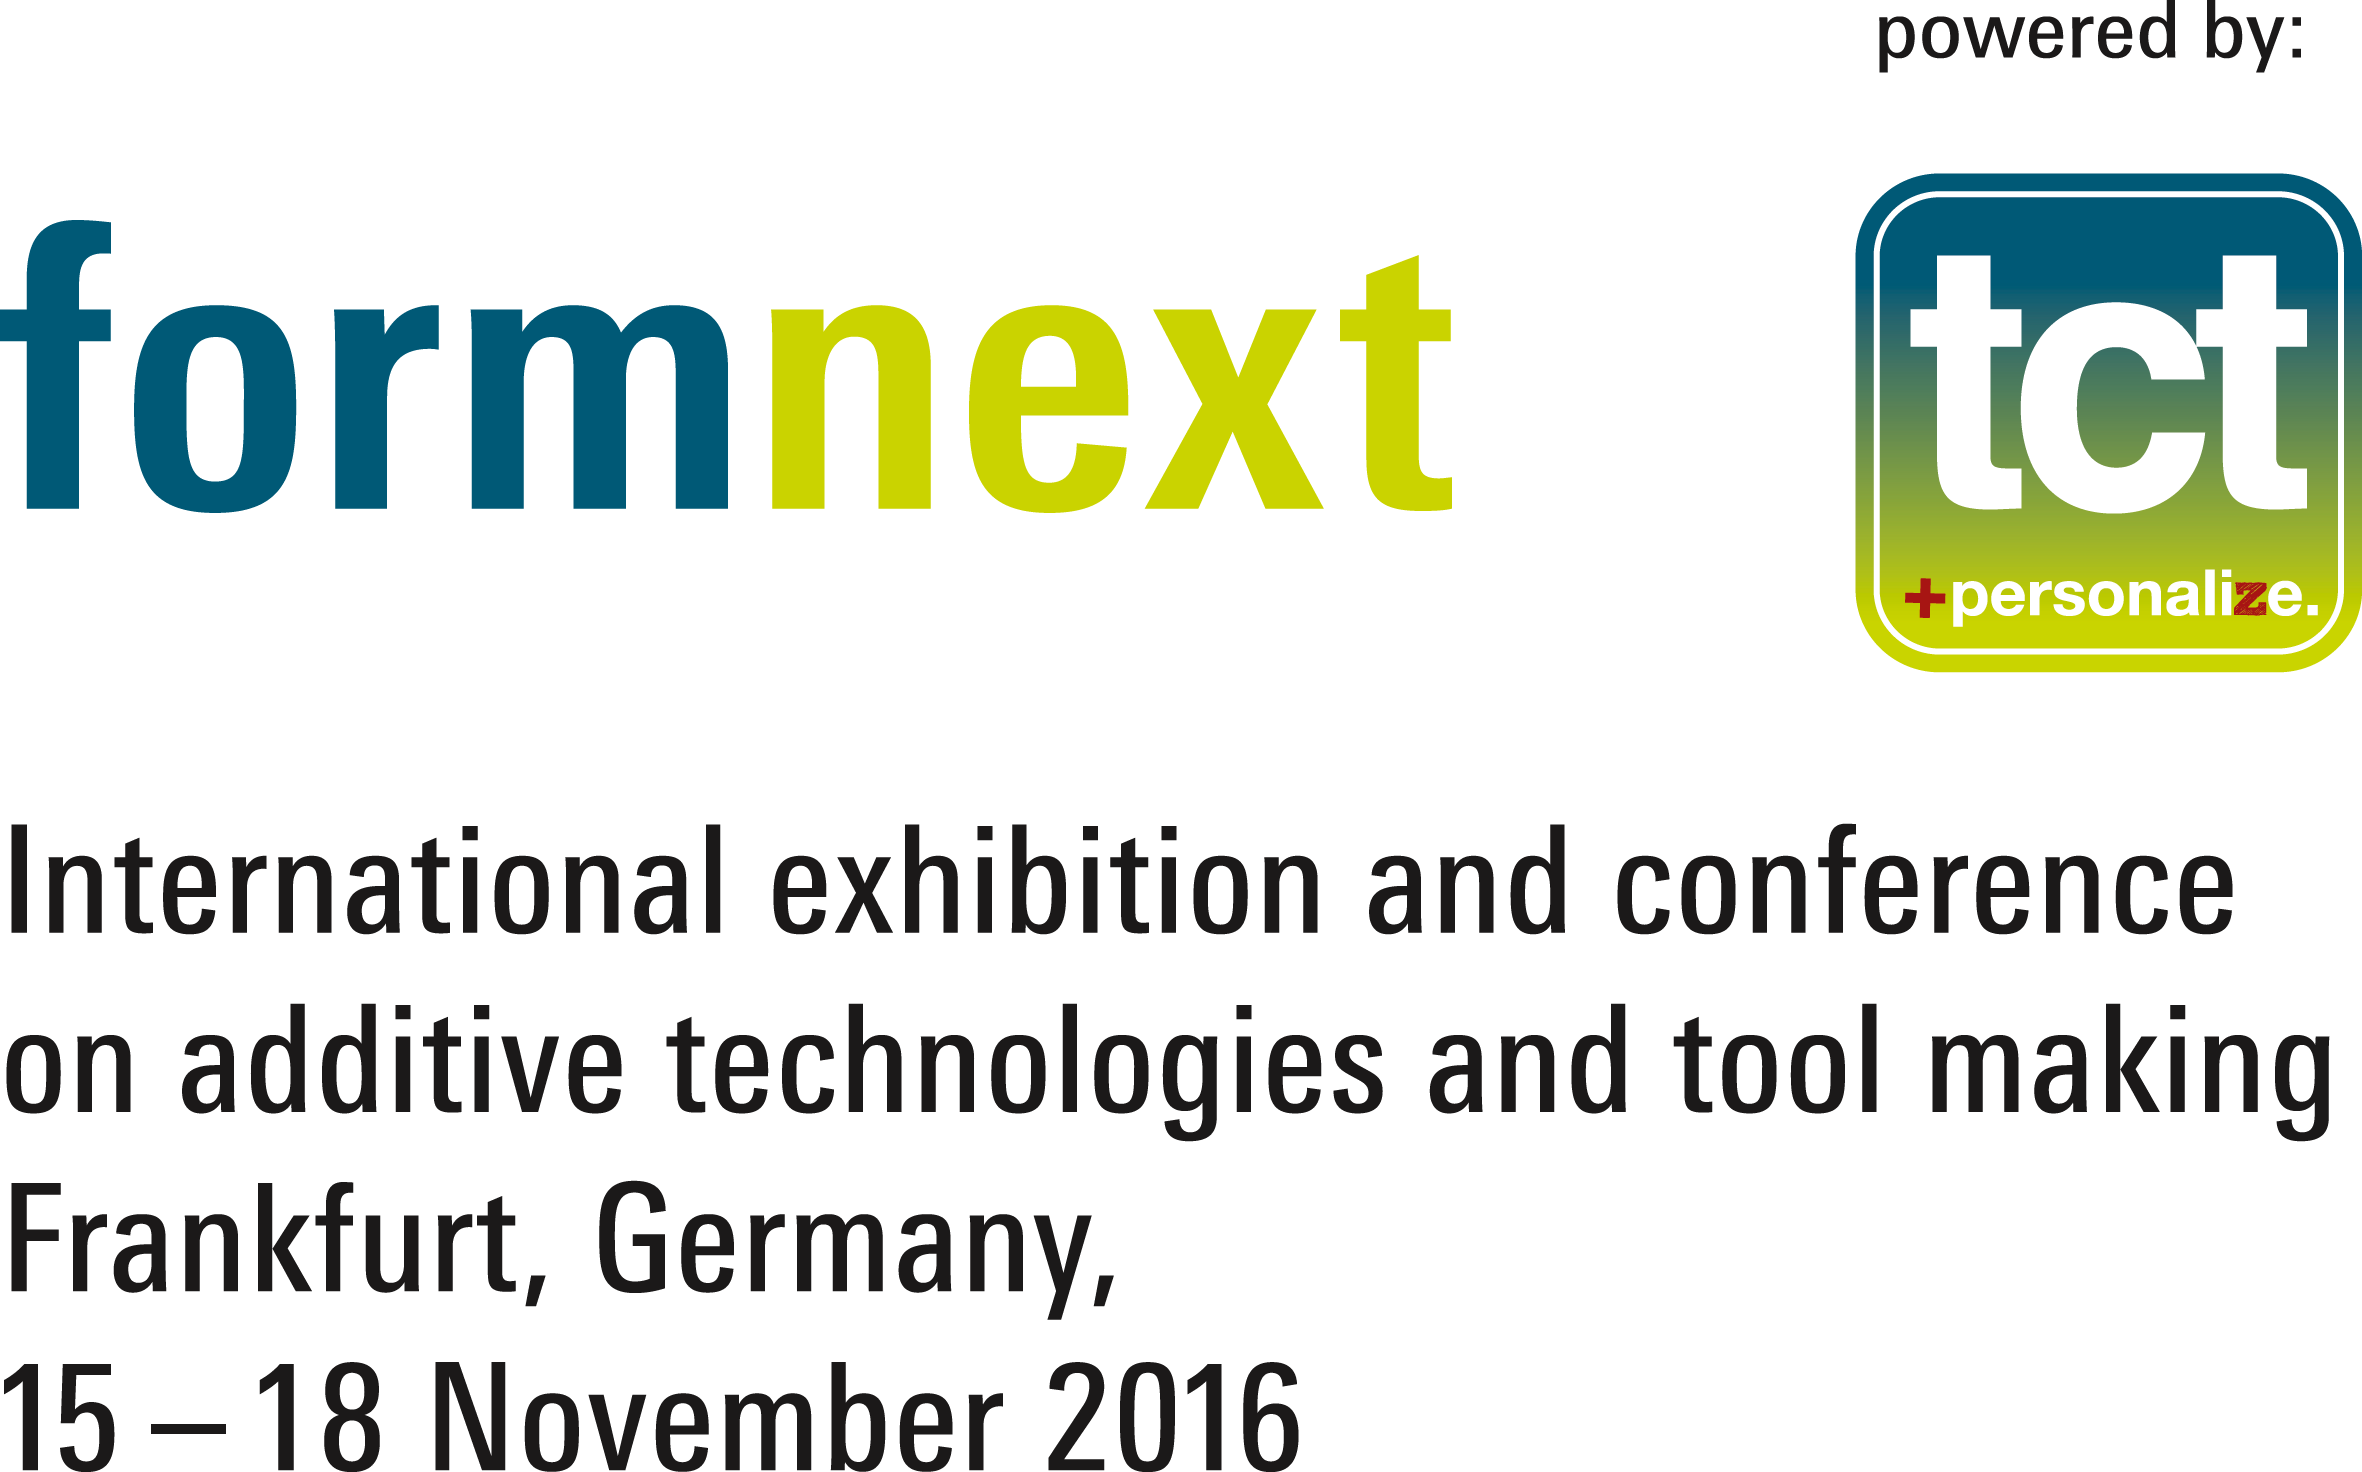 Formnext powered by TCT 2016